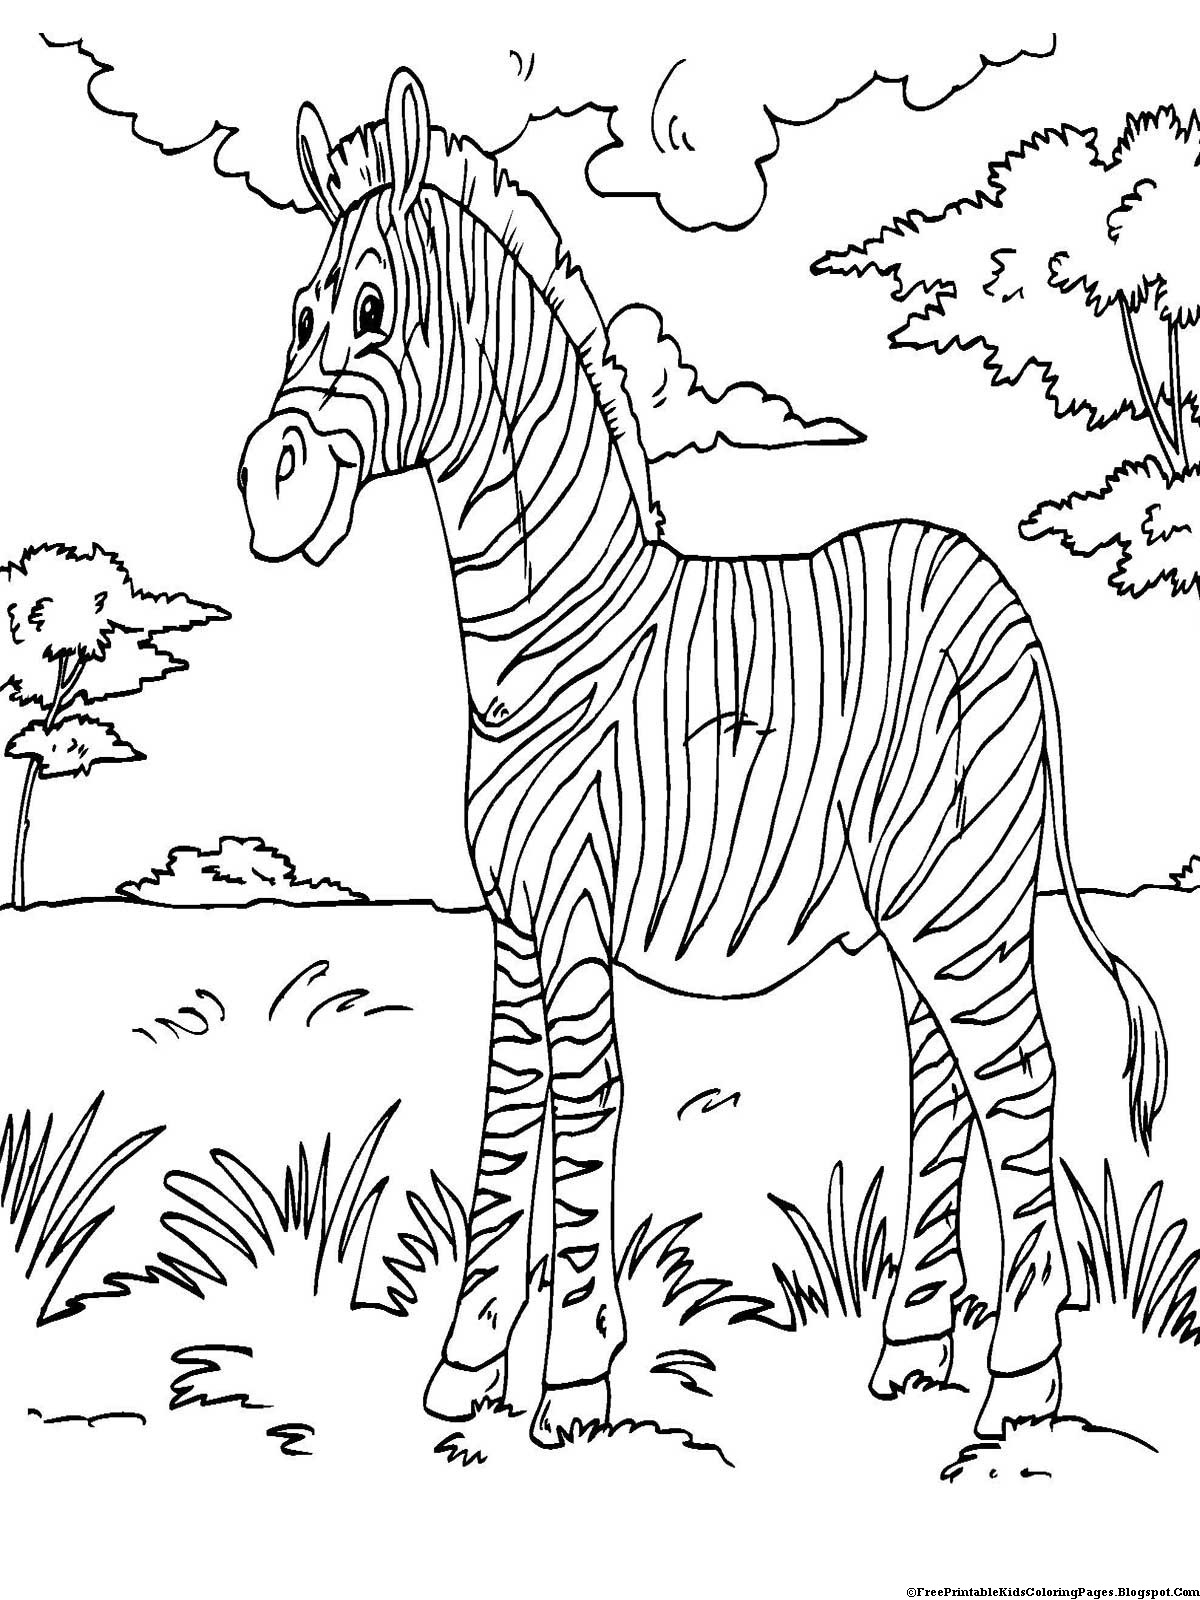 Coloring Pages Printable
 Zebra Coloring Pages Free Printable Kids Coloring Pages